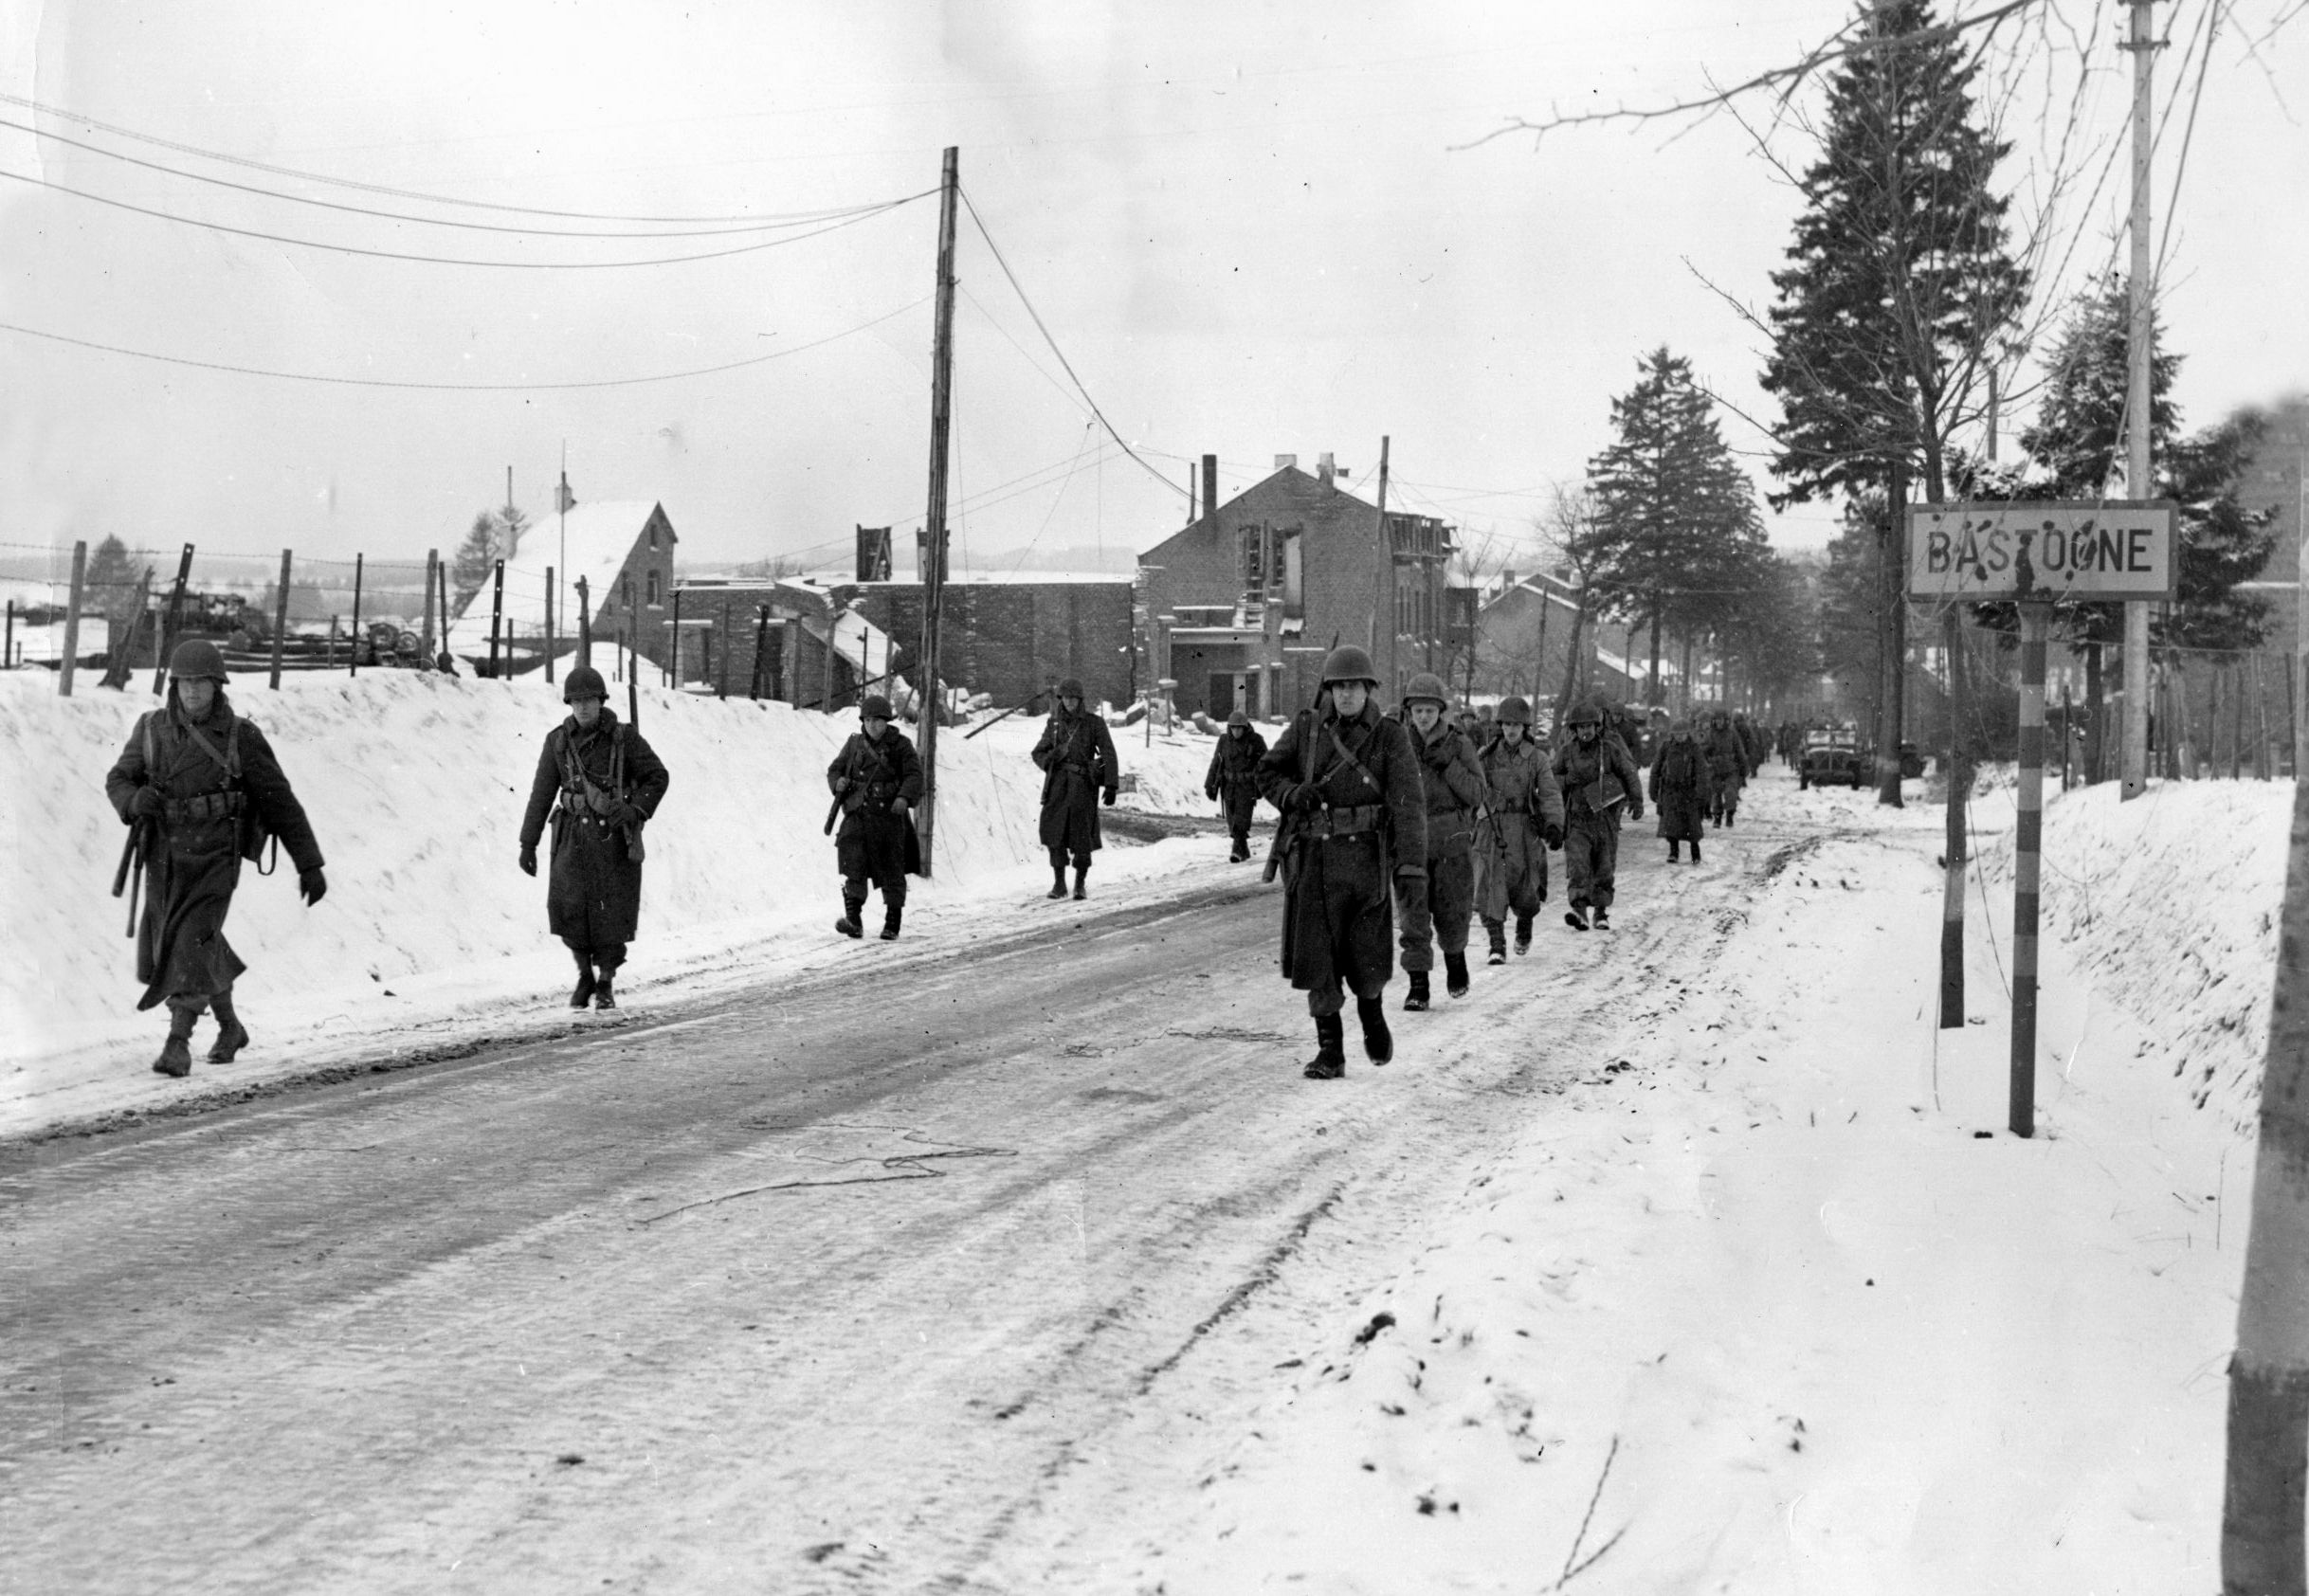 Weary troopers of the 101st Airborne Division march in two columns along a road on the outskirts of the Belgian crossroads town. The heroism of the 101st and other American troops at Bastogne stemmed the German tide during the Battle of the Bulge.